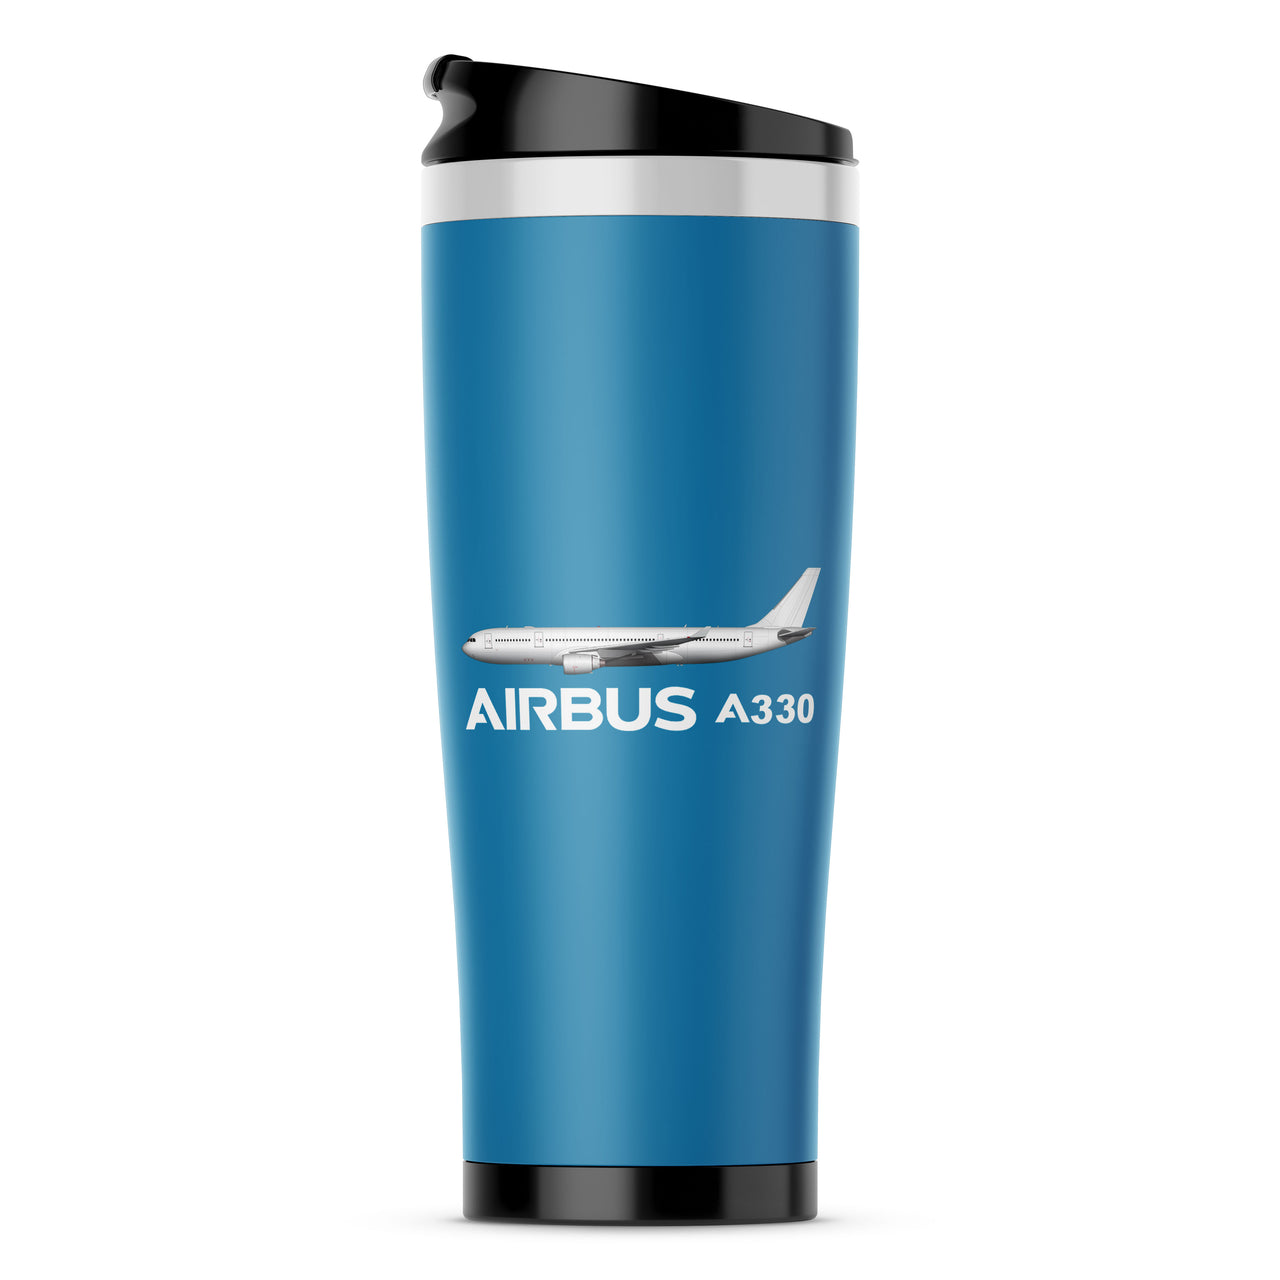 The Airbus A330 Designed Travel Mugs